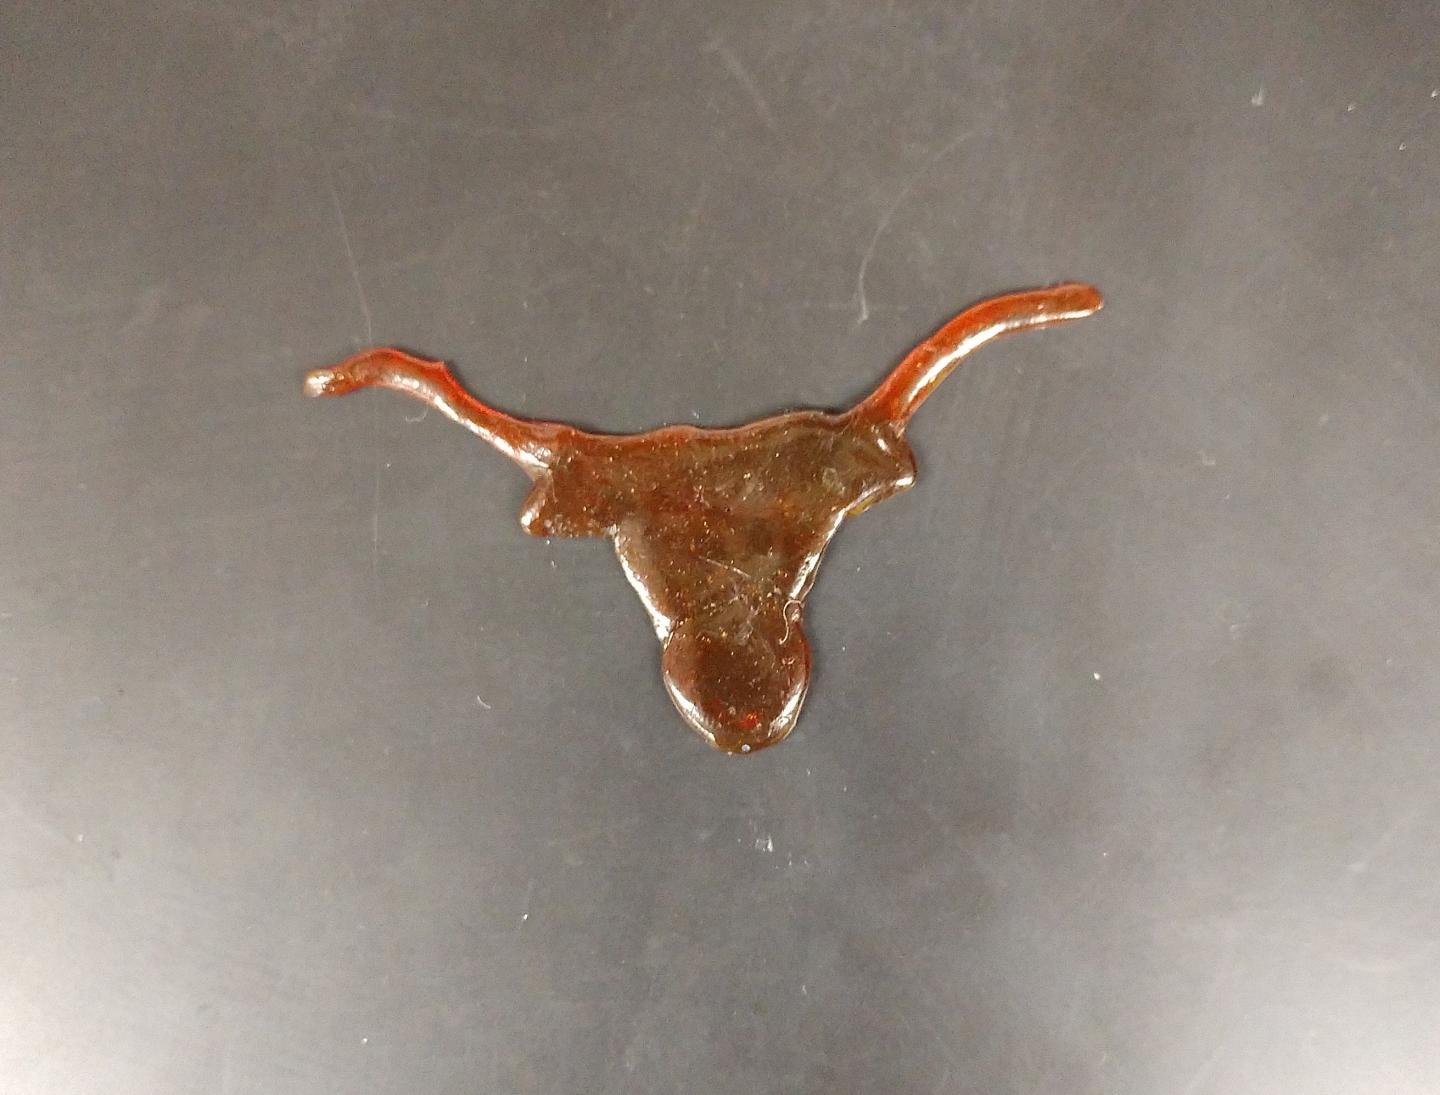 New Plastic Material in Longhorn Silhouette